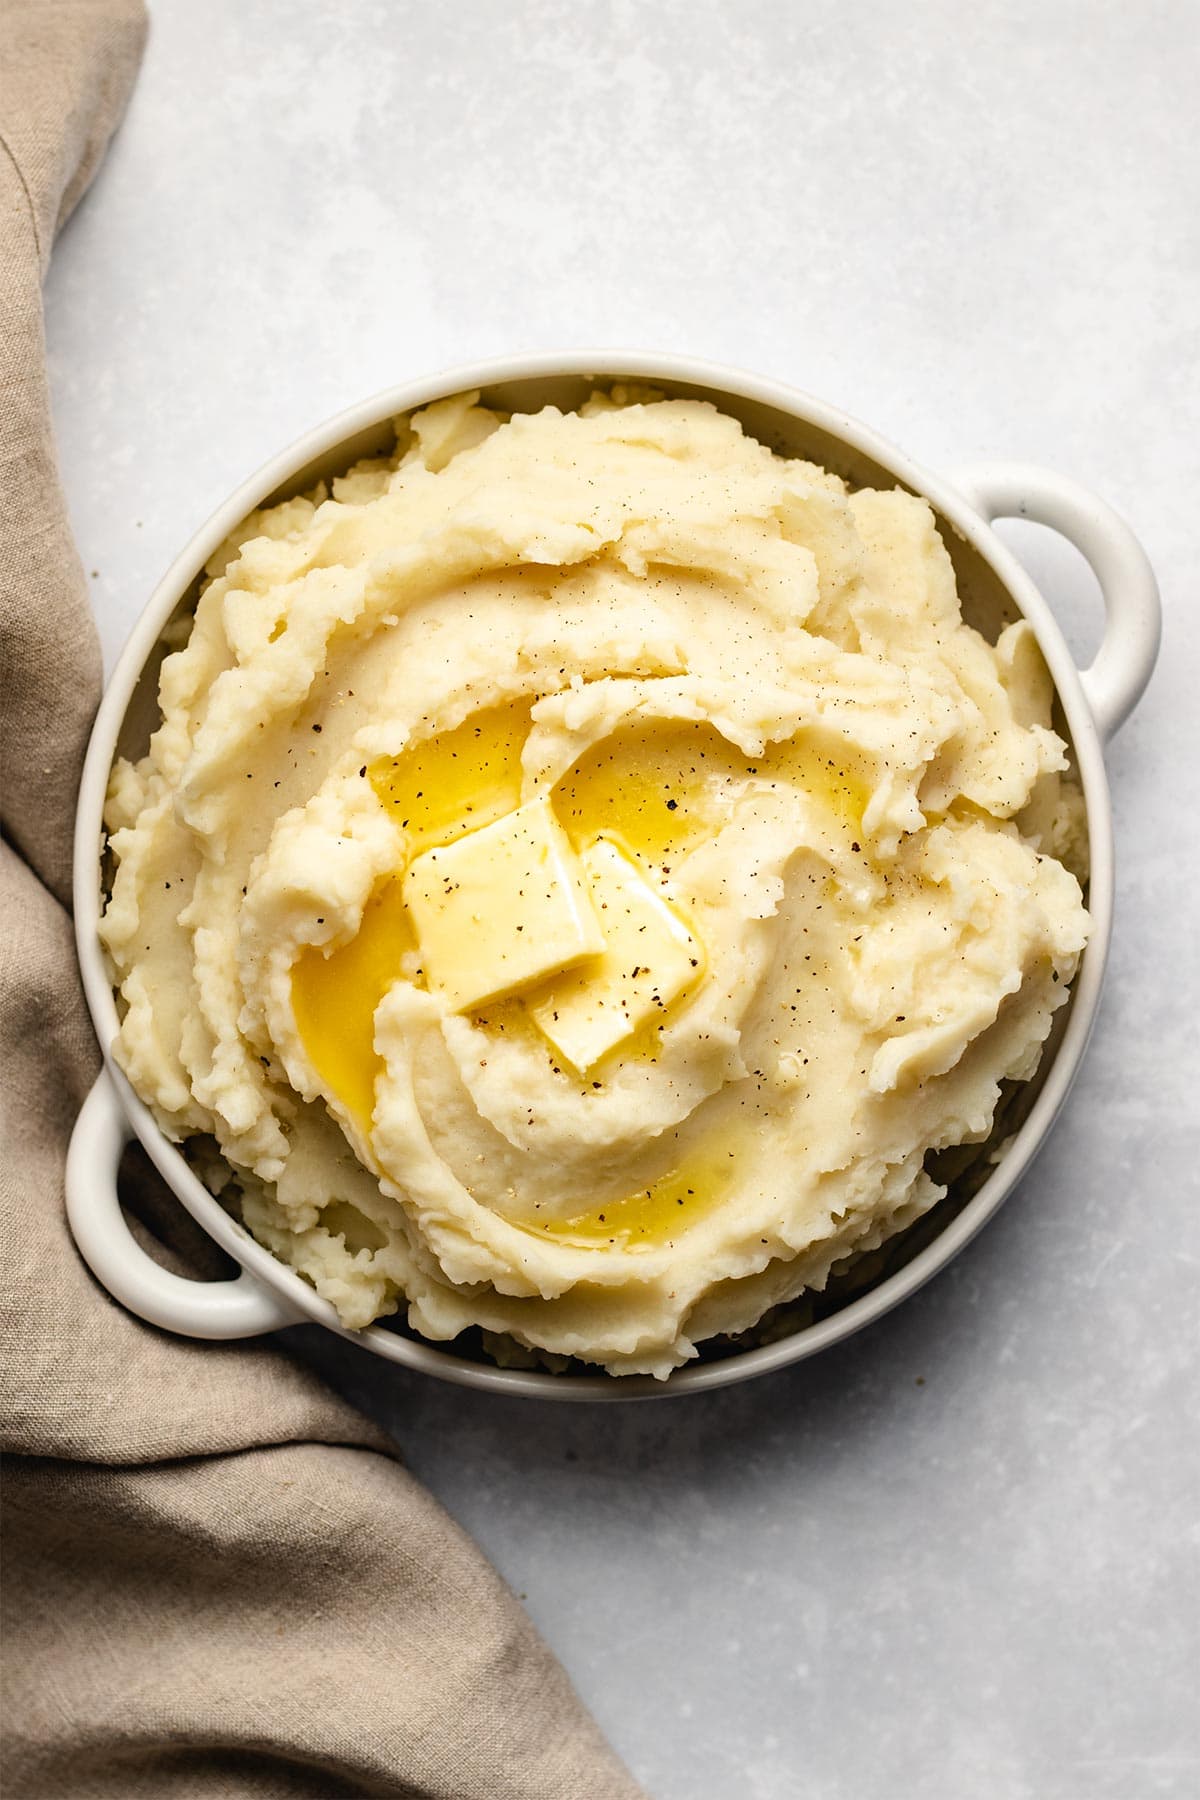 Butter melting on mashed potatoes in a white bowl